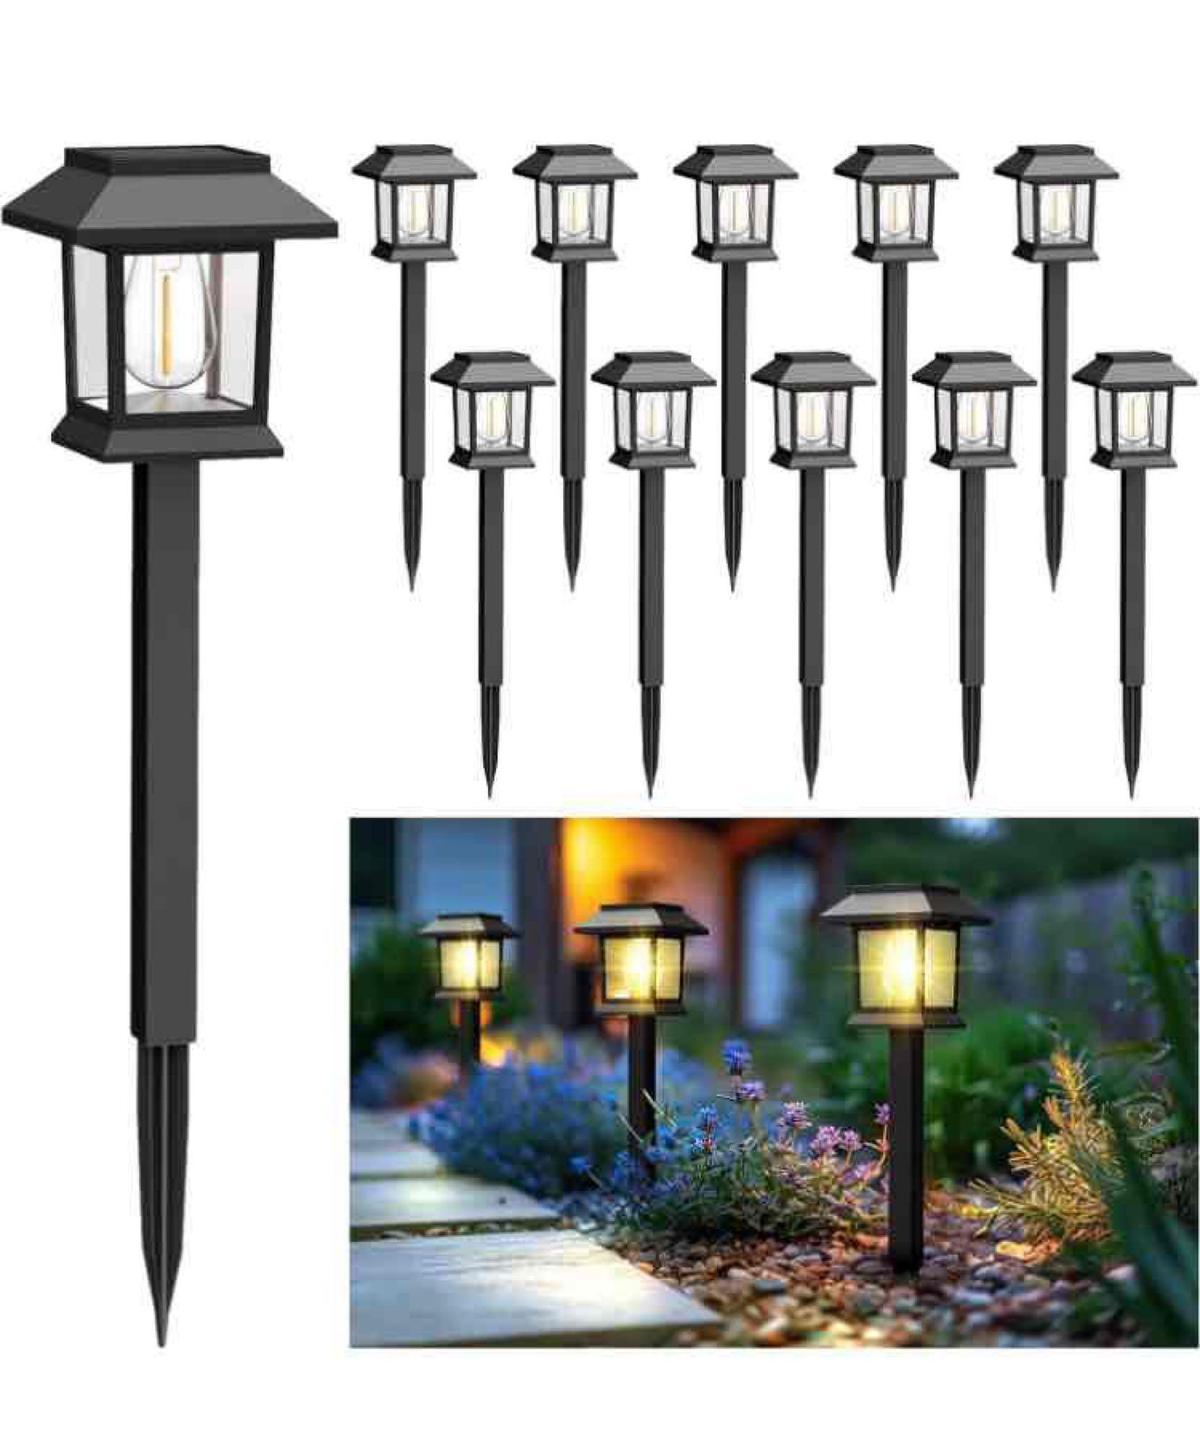 Solar Lights for Outside,10 Pack Waterproof Solar Garden Lights, Auto On/Off Solar Pathway Lights